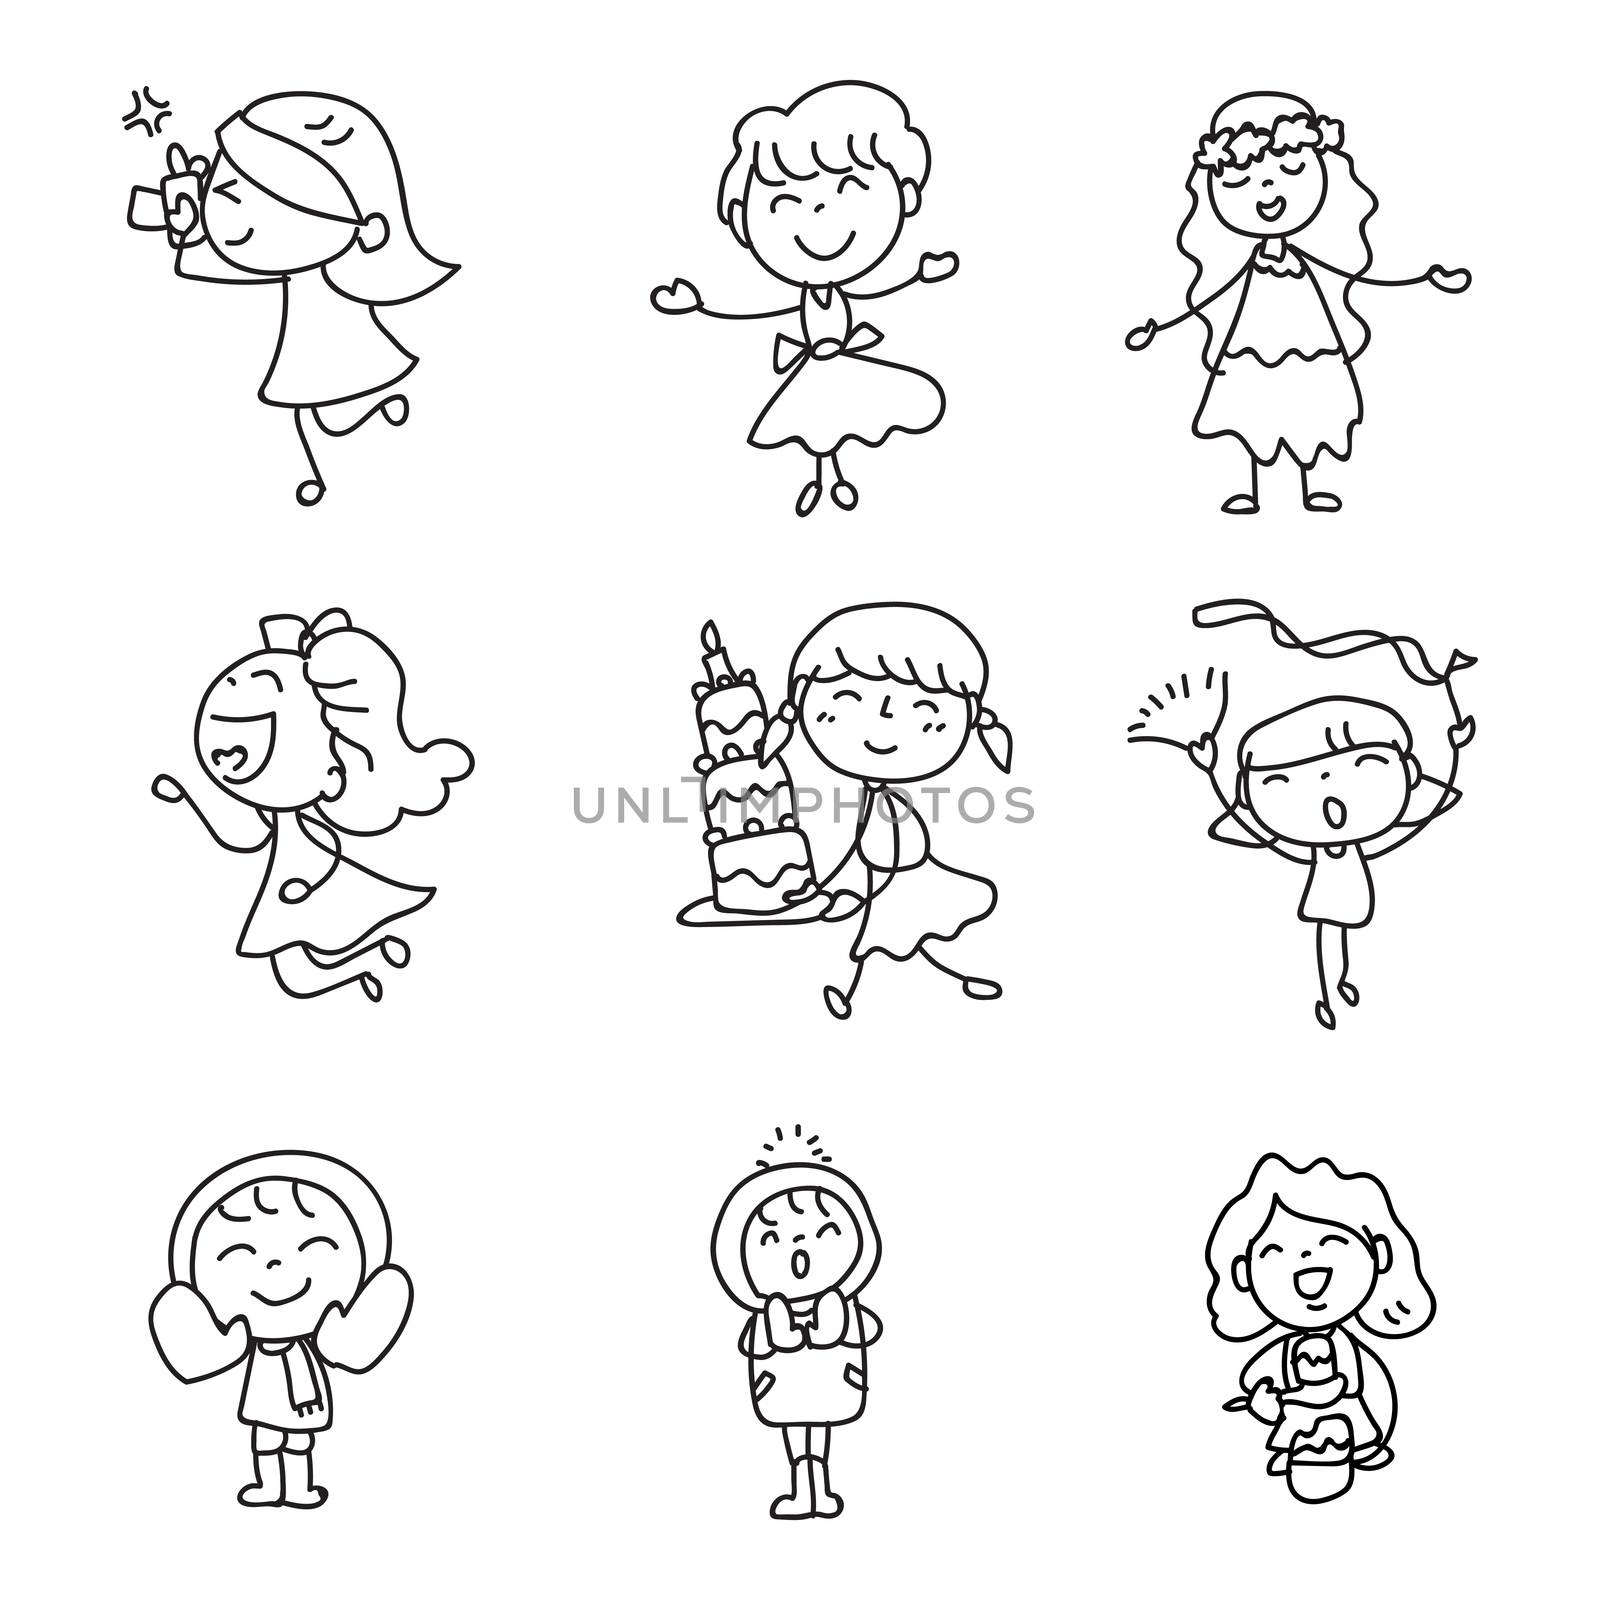 children illustration hand drawing vector happy kids girls happiness concept abstract cartoon character doodle design style line art. all objects group with white filled. ready to use as clip art.